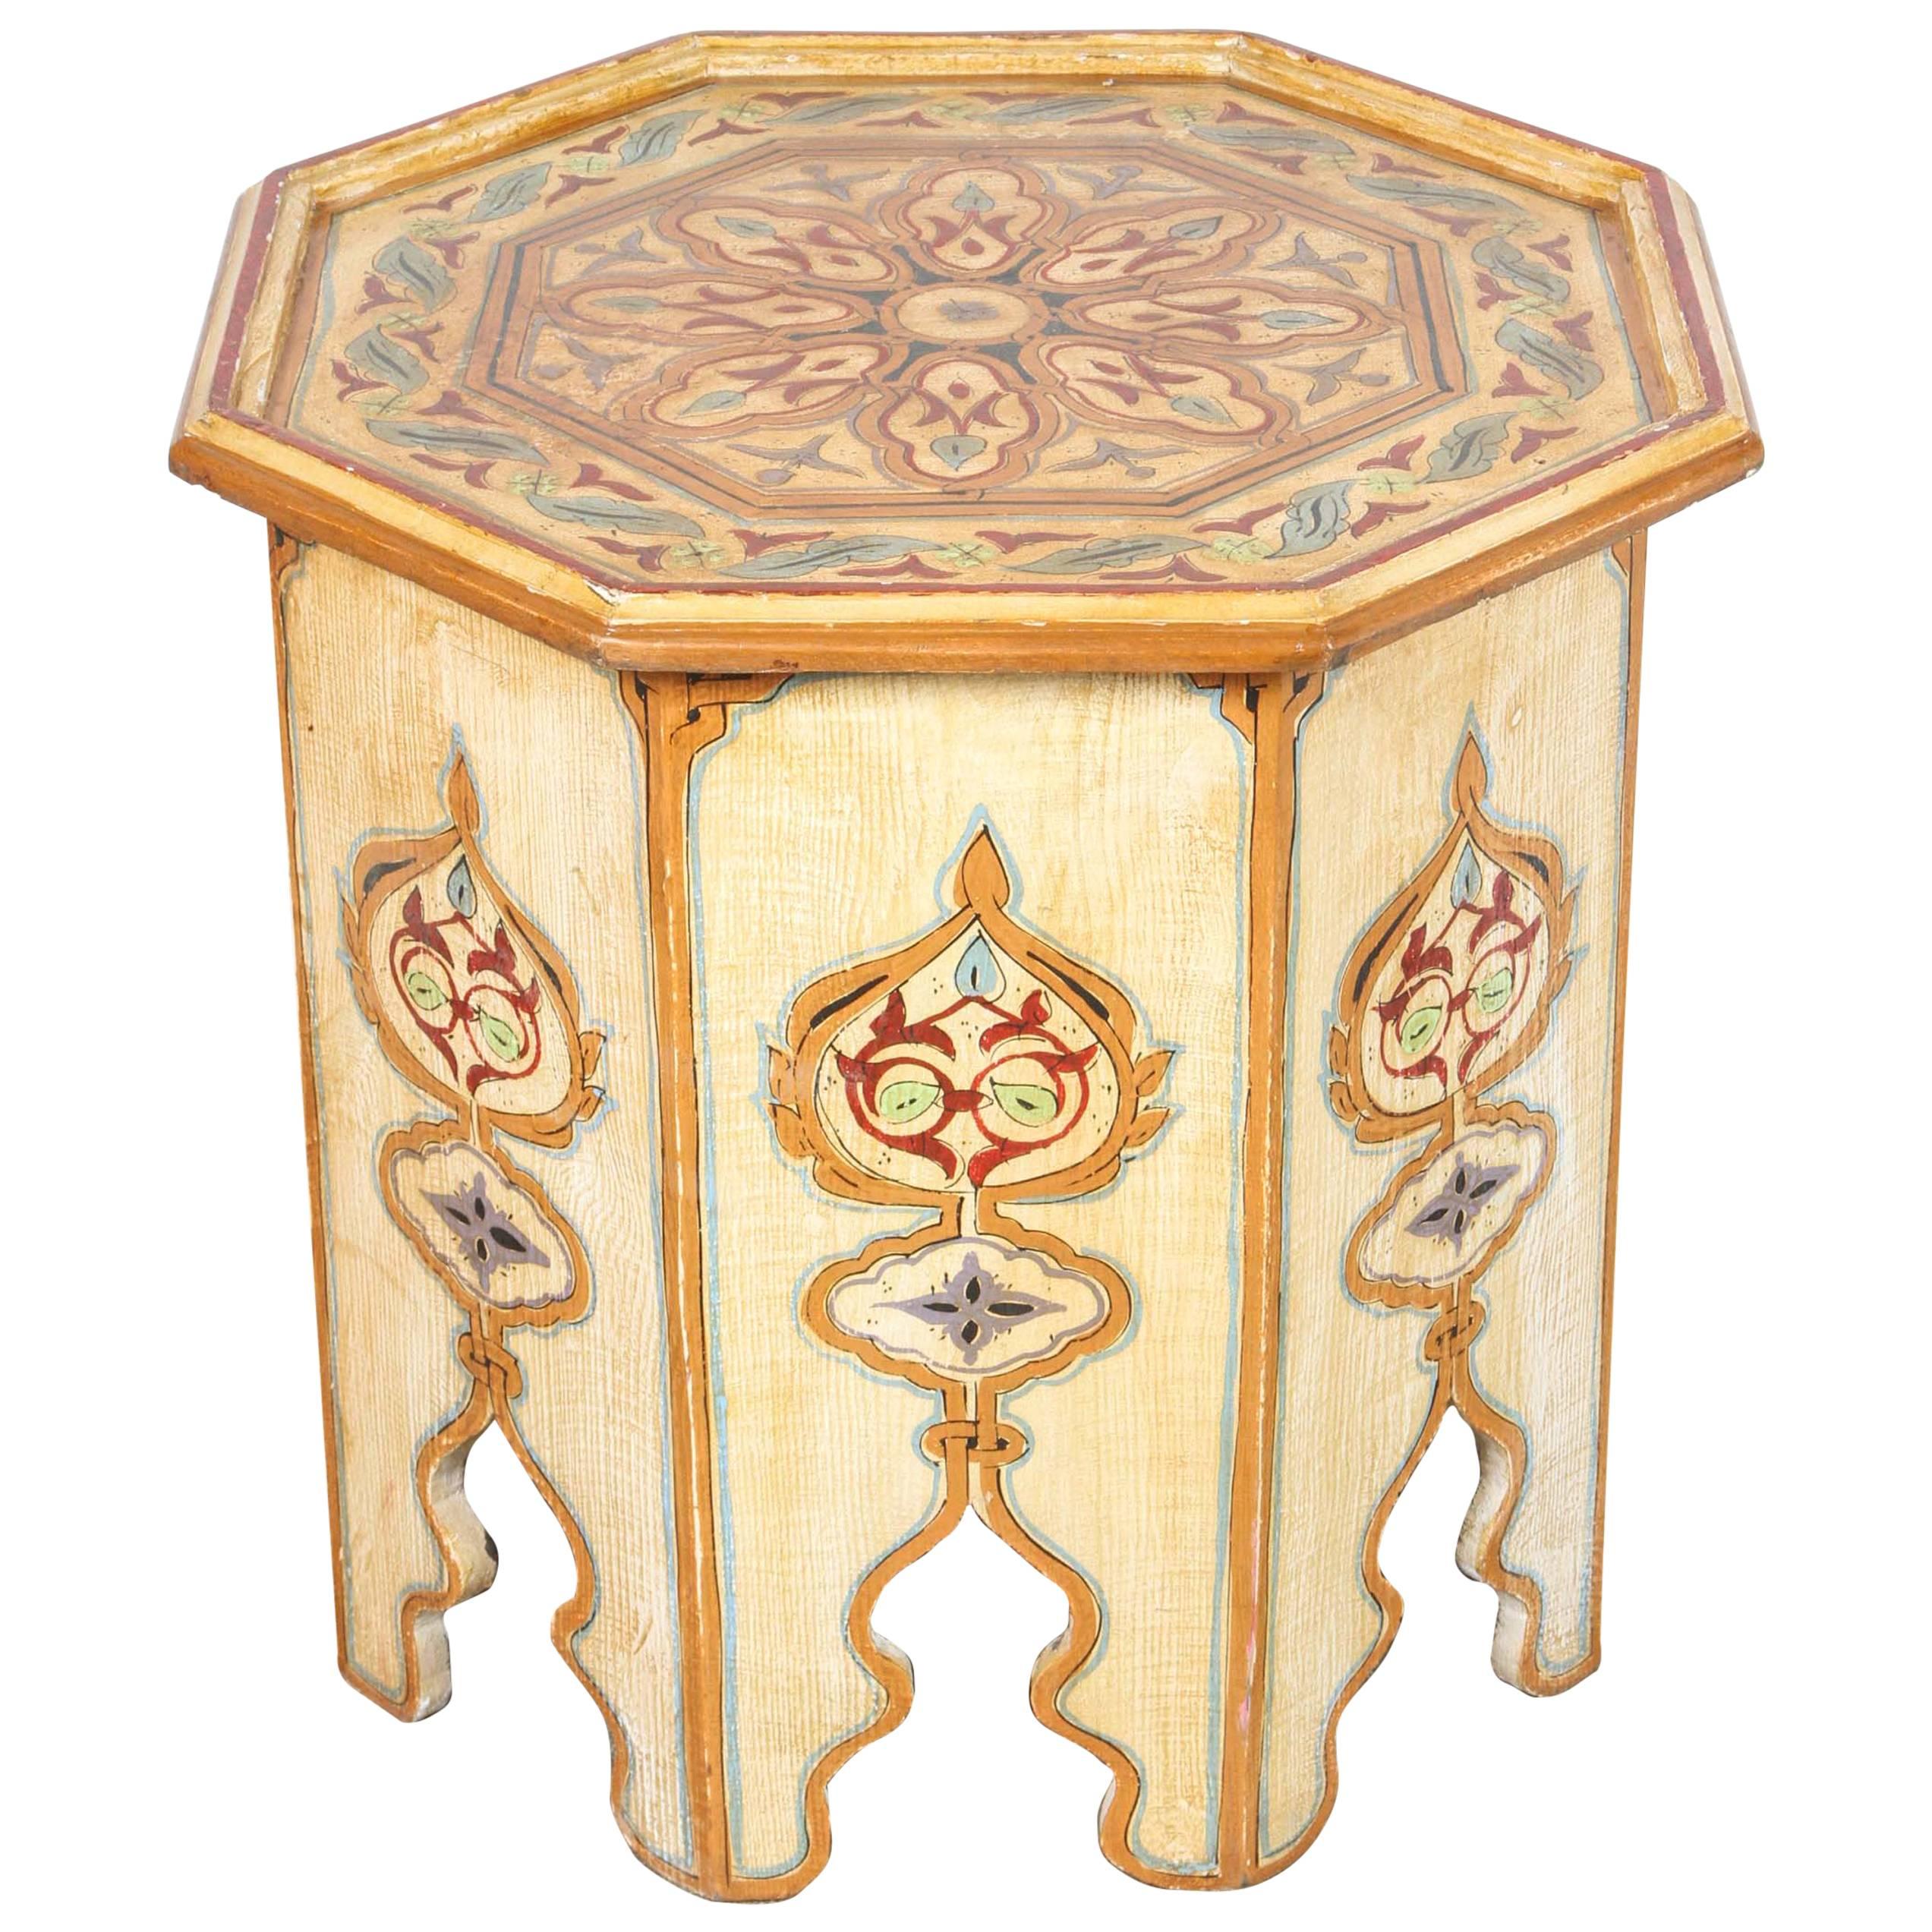 Moroccan Ivory Hand-Painted Side Table with Moorish Design